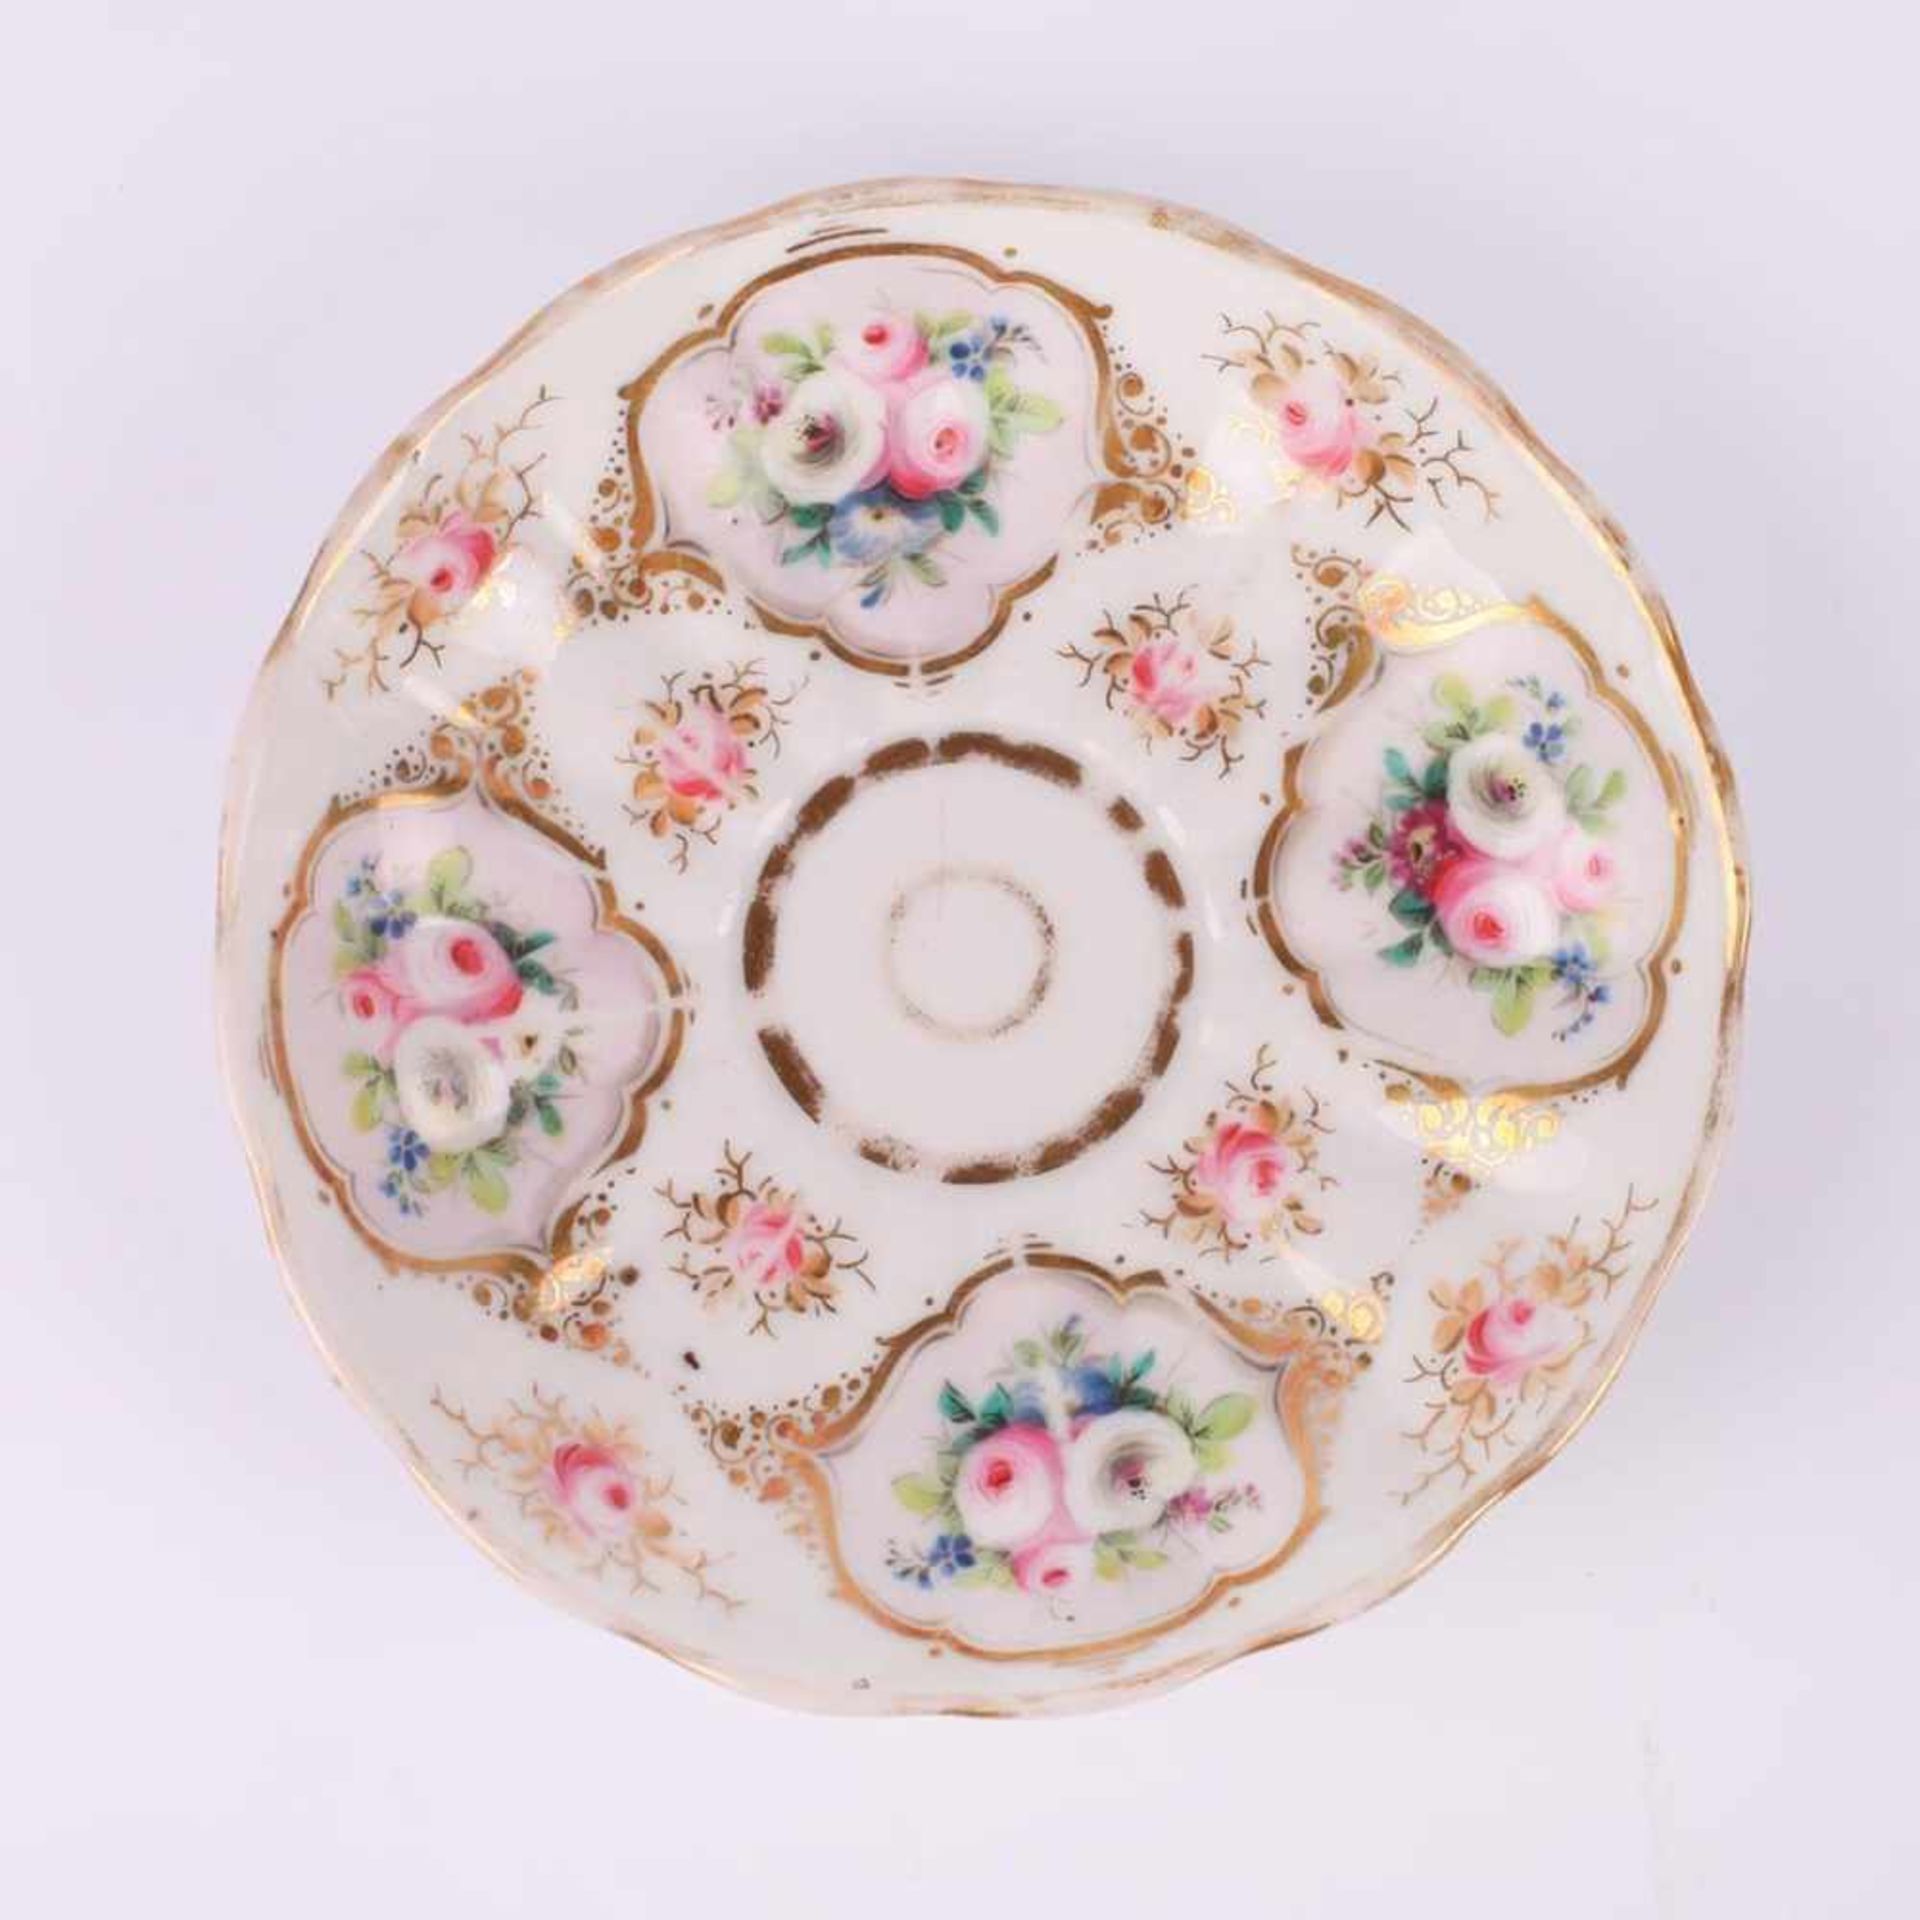 Tea cup and saucer set with flower painting. Kudinov Porceline Factory (?). Russia. 1820s. - Image 8 of 10